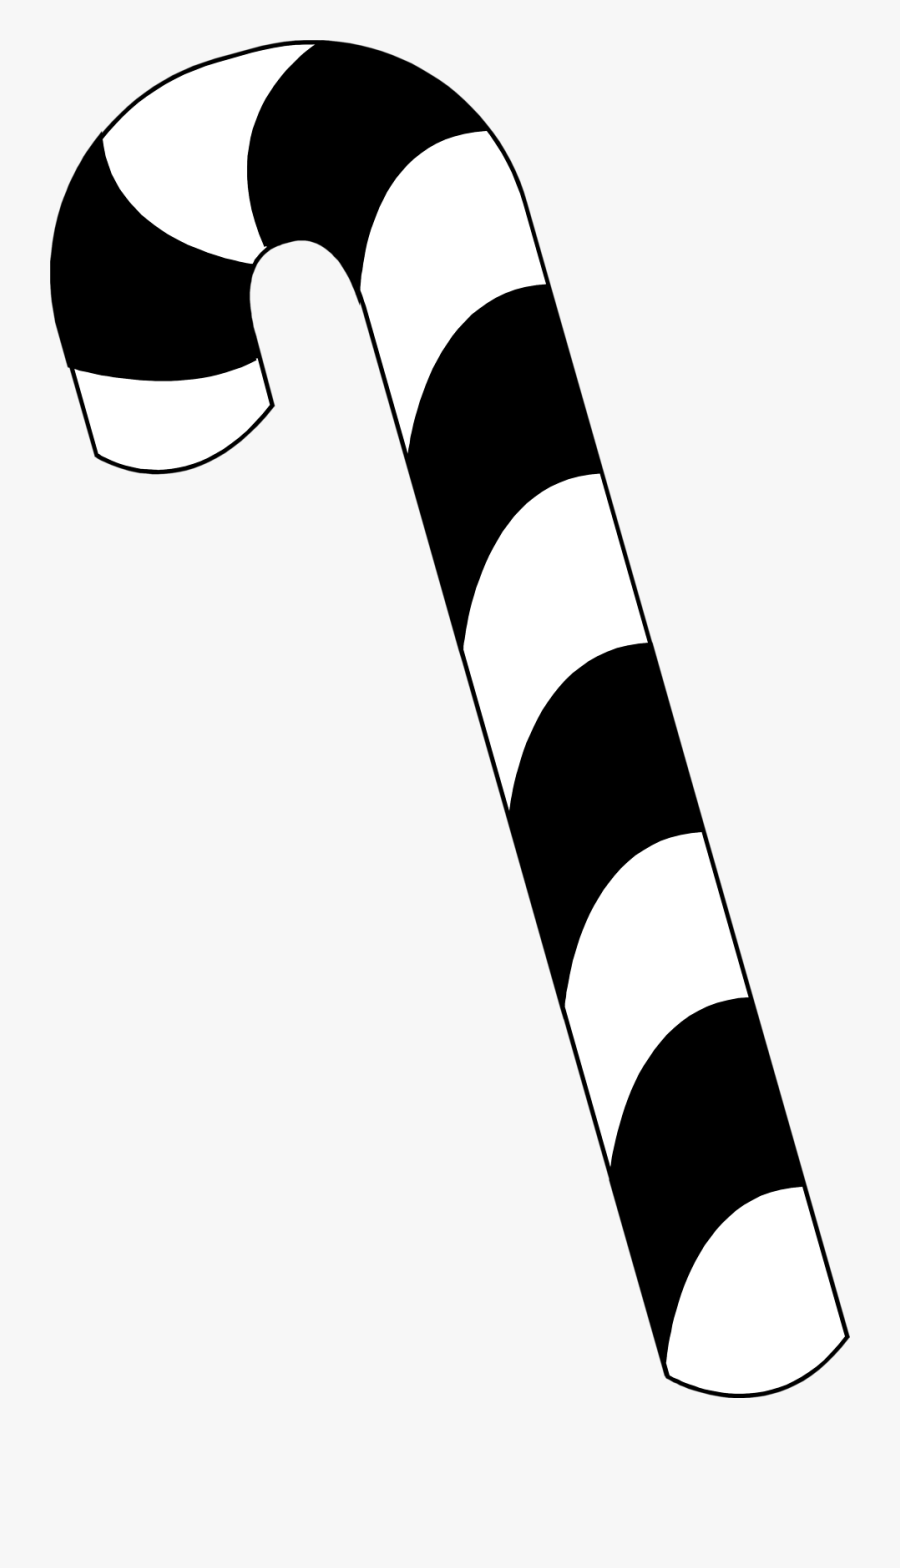 Free Candy Cane Template Printables Clip Art Image - Candy Cane Black And White, Transparent Clipart